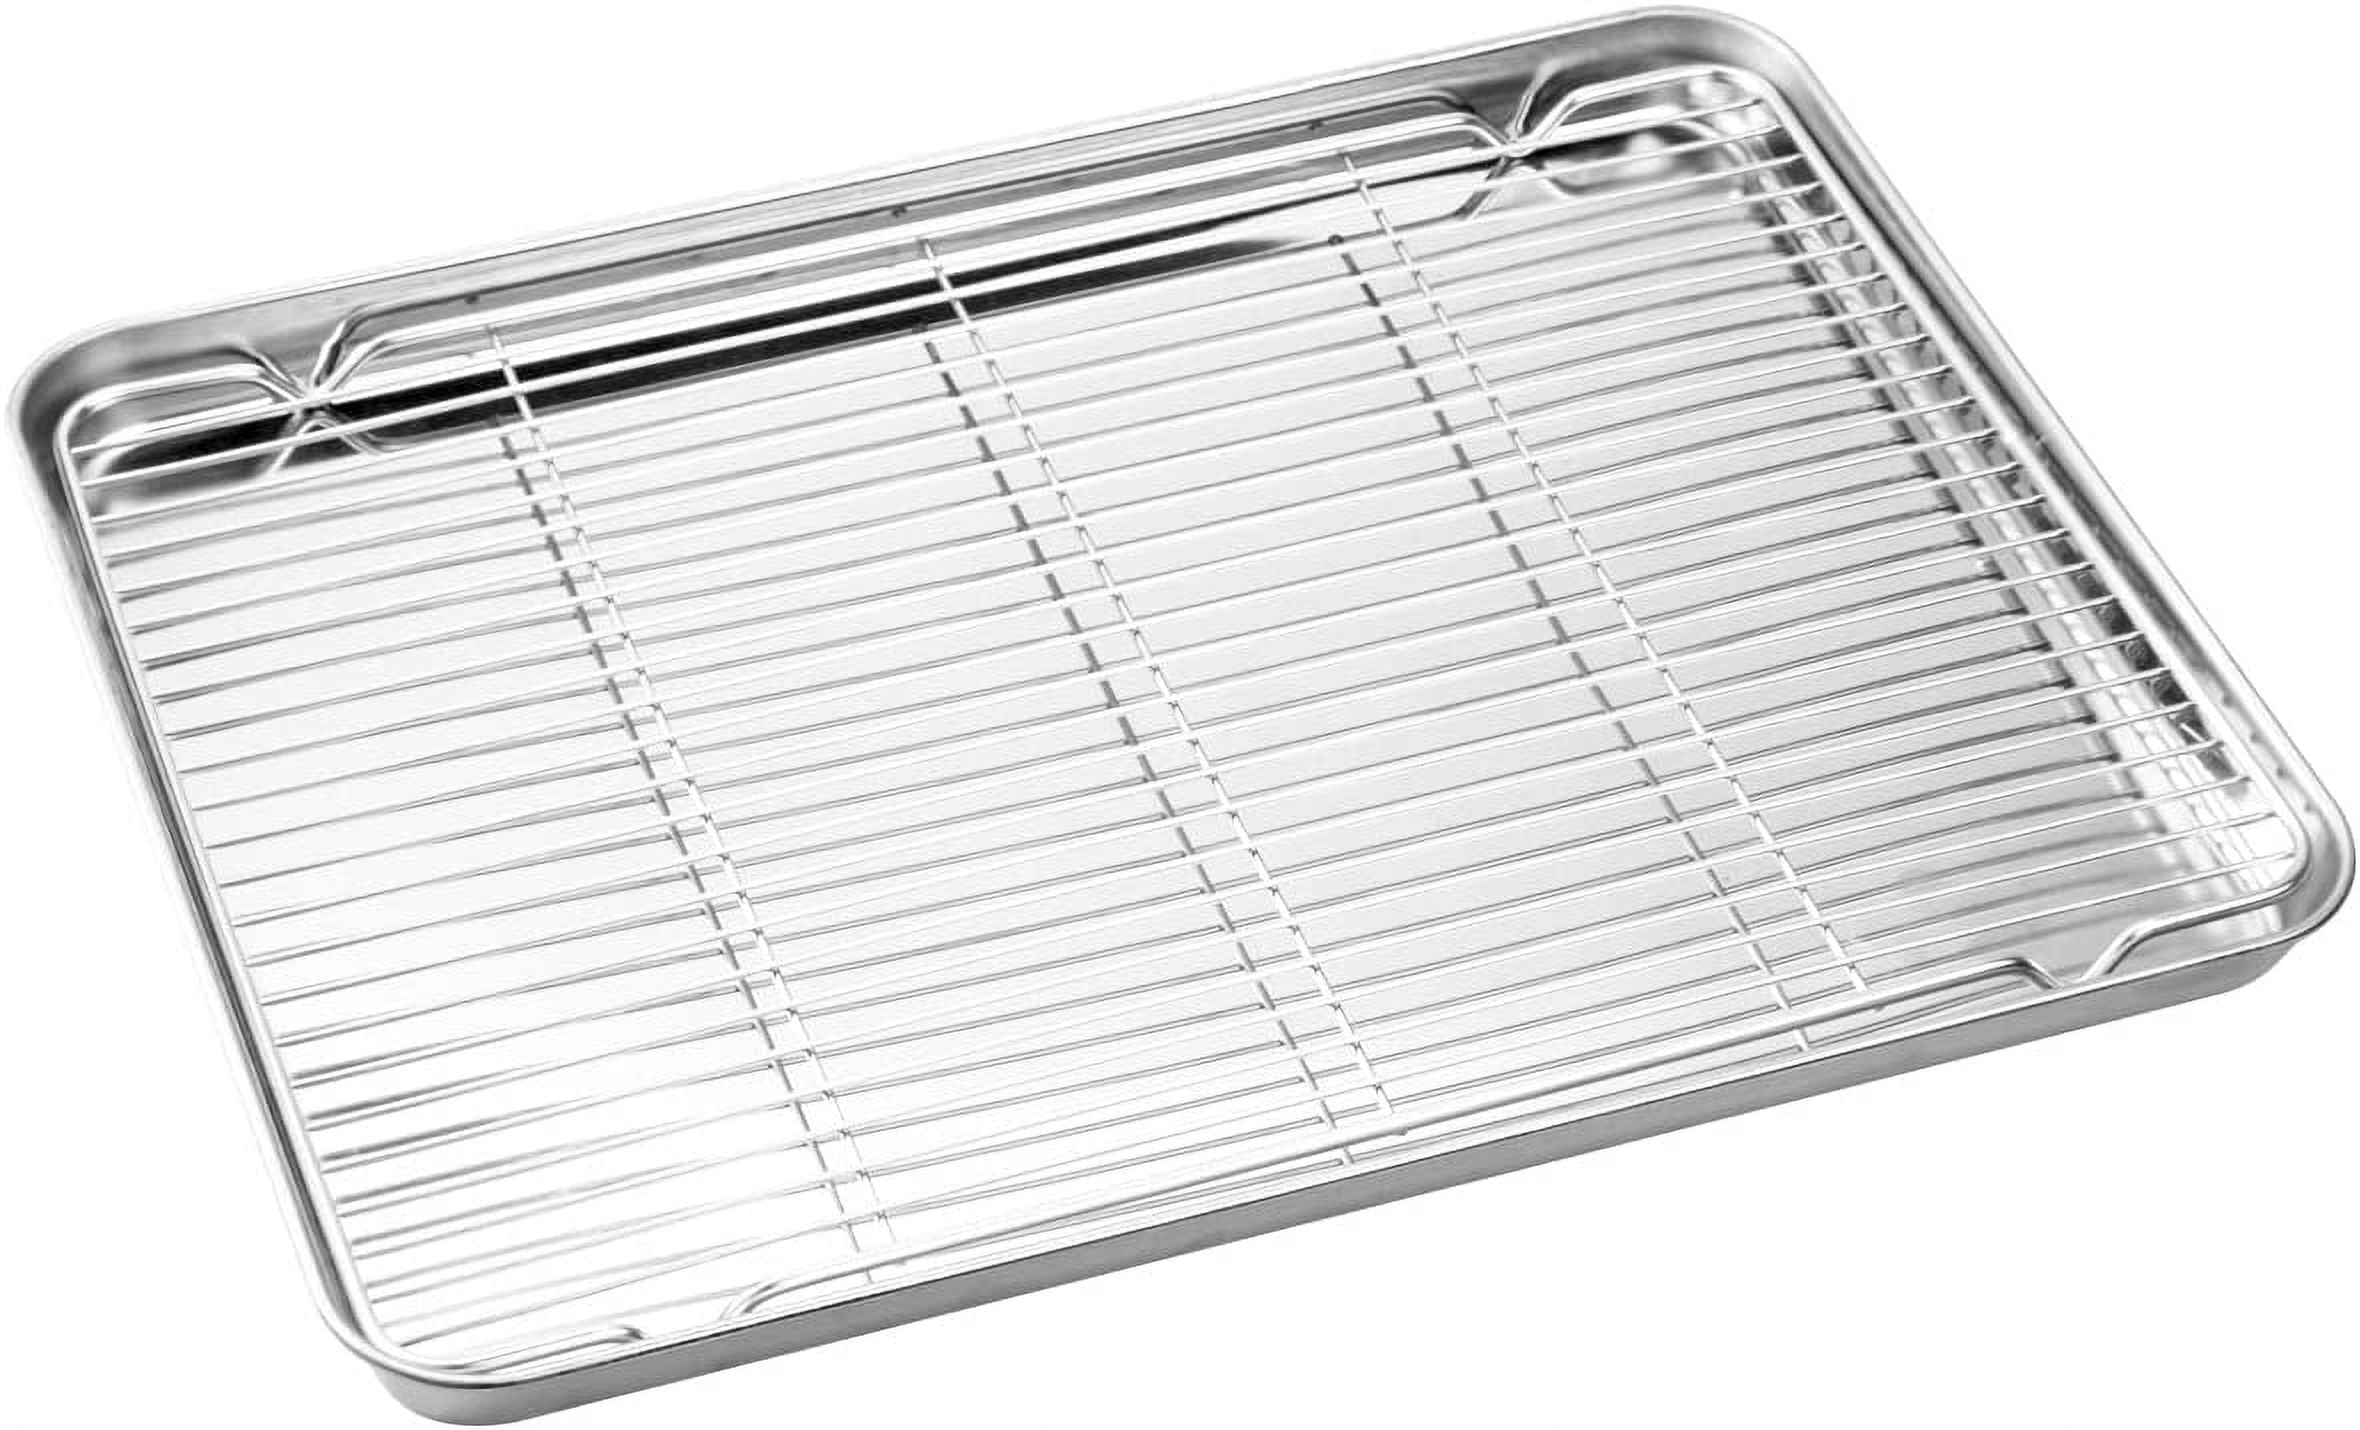 Large Set Baking Sheet and Cooling Rack Set, Bastwe 24L x 16W x 1H inch  Professional Bakeware, Healthy & Nontoxic & Rustproof & Easy Clean